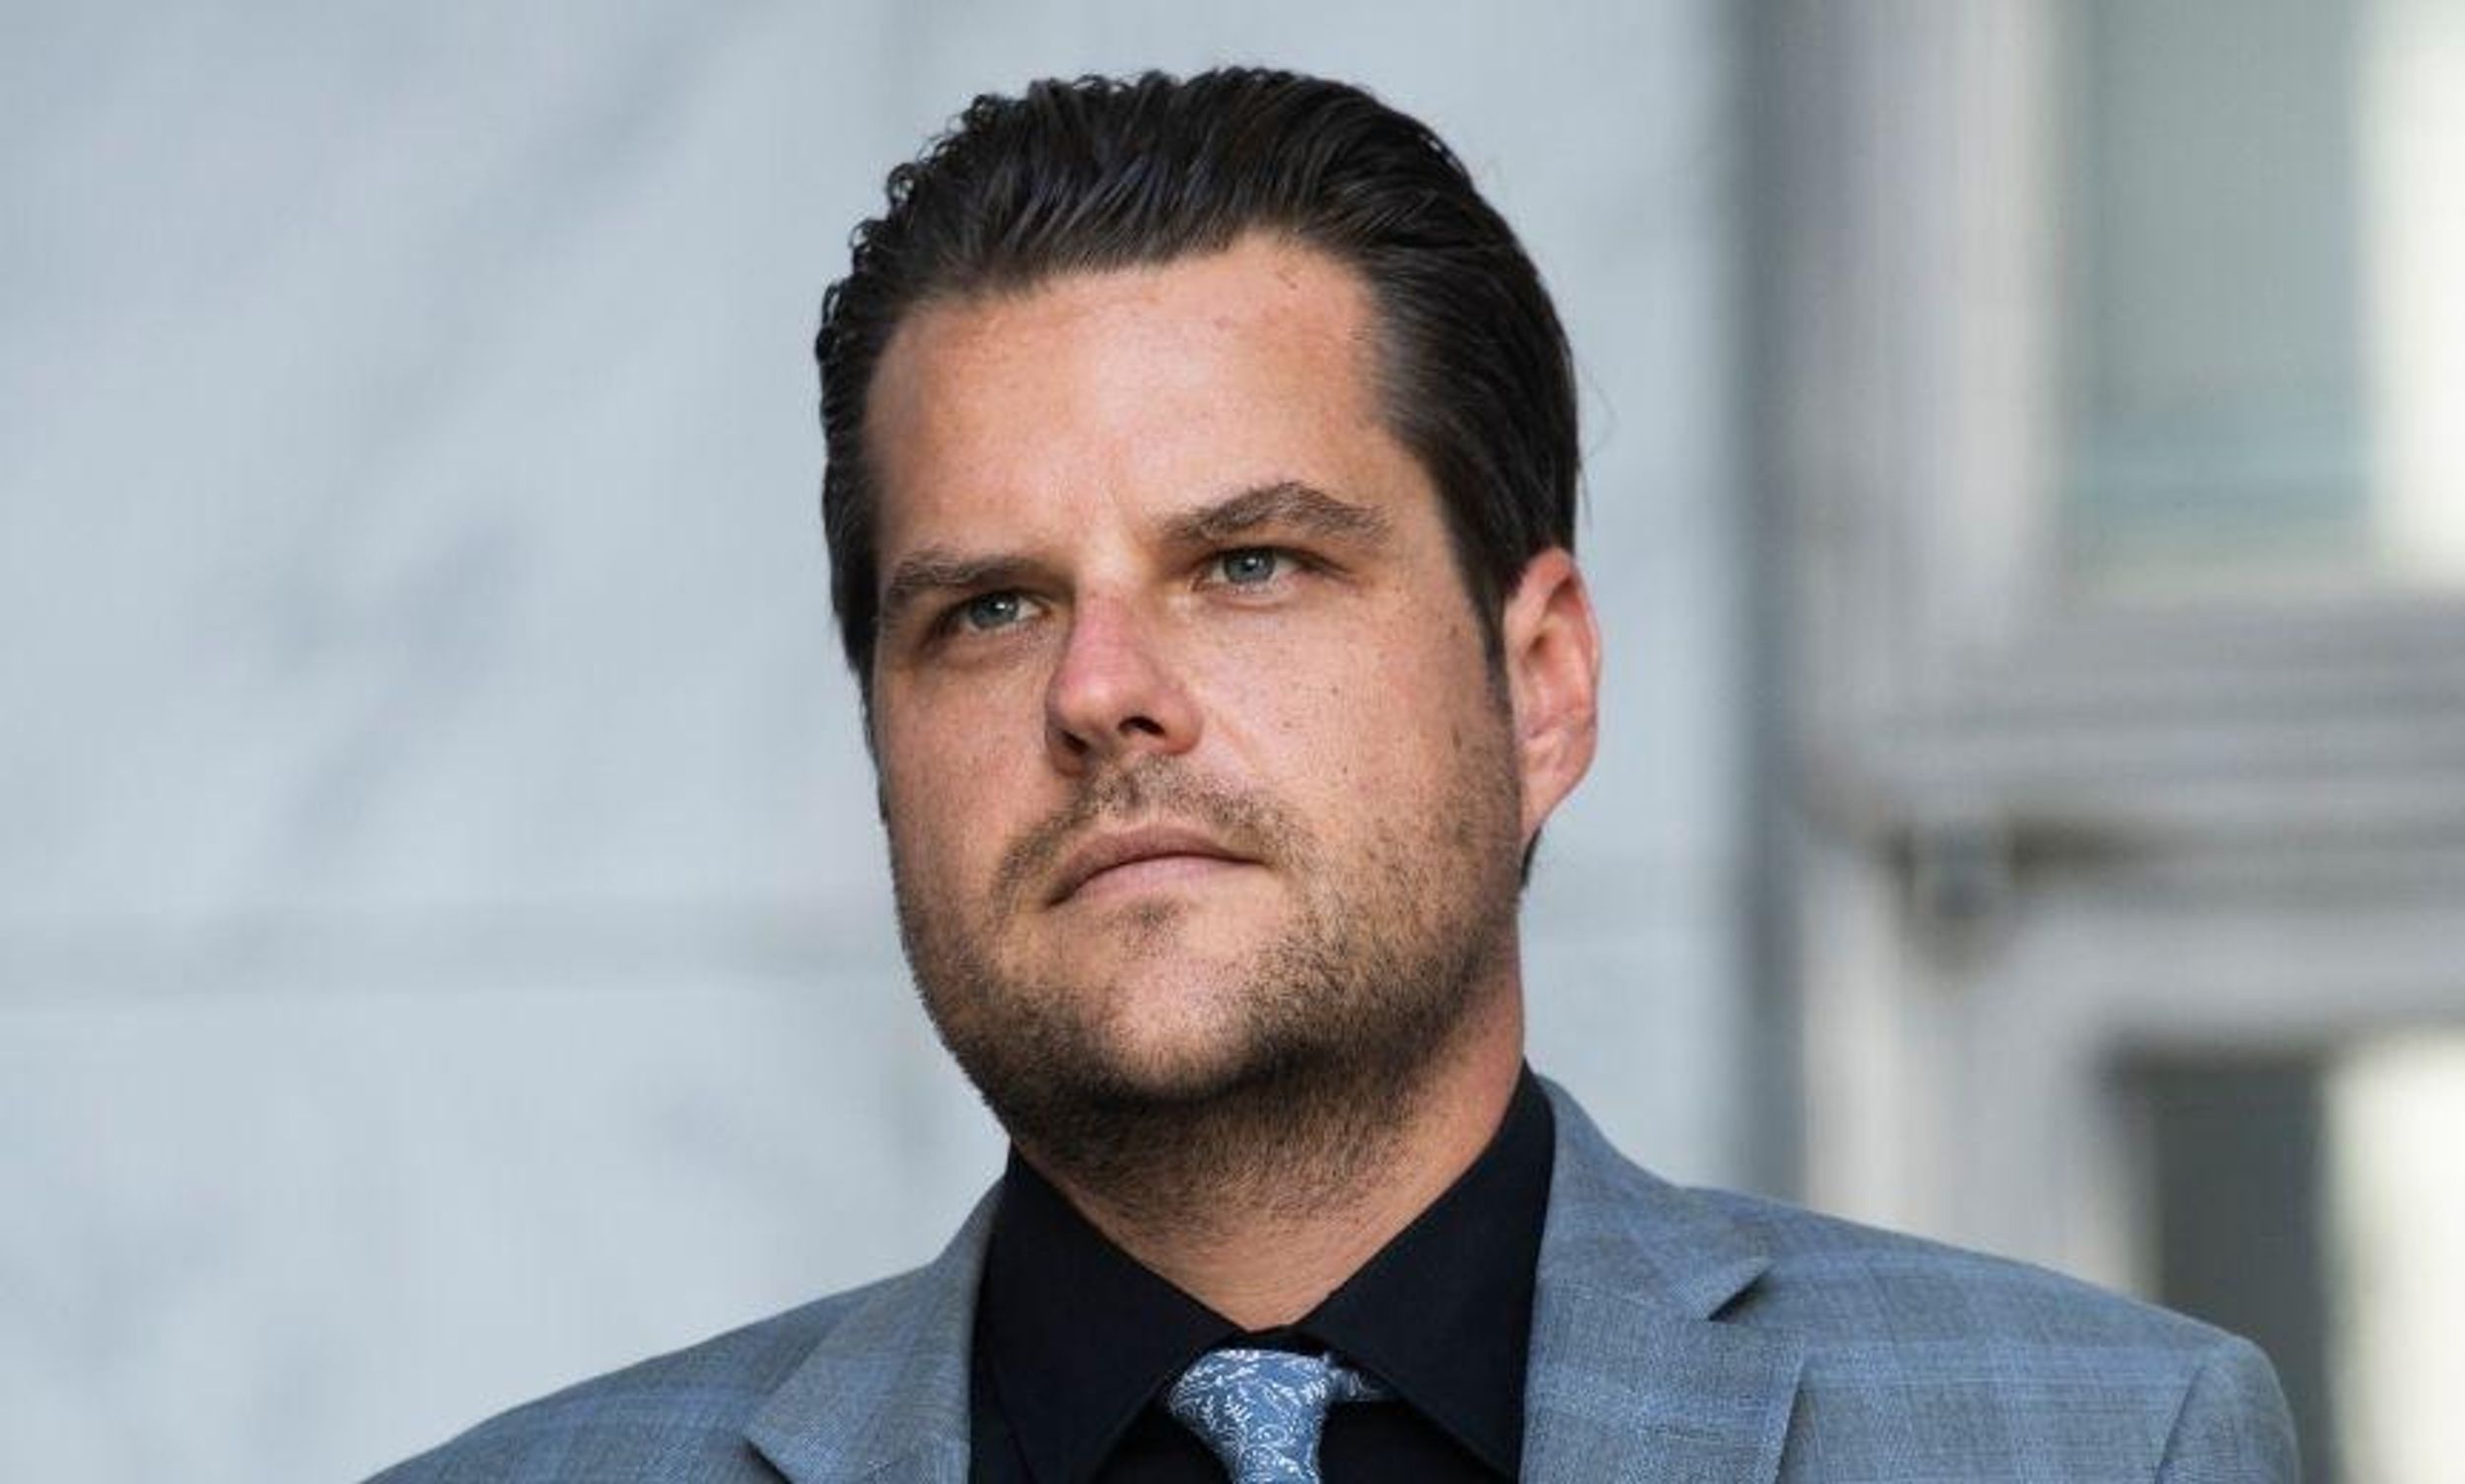 Matt Gaetz Roasted for Saying He's 'Not a Monk' in Op-Ed Defending Himself Against Sex Trafficking Investigation